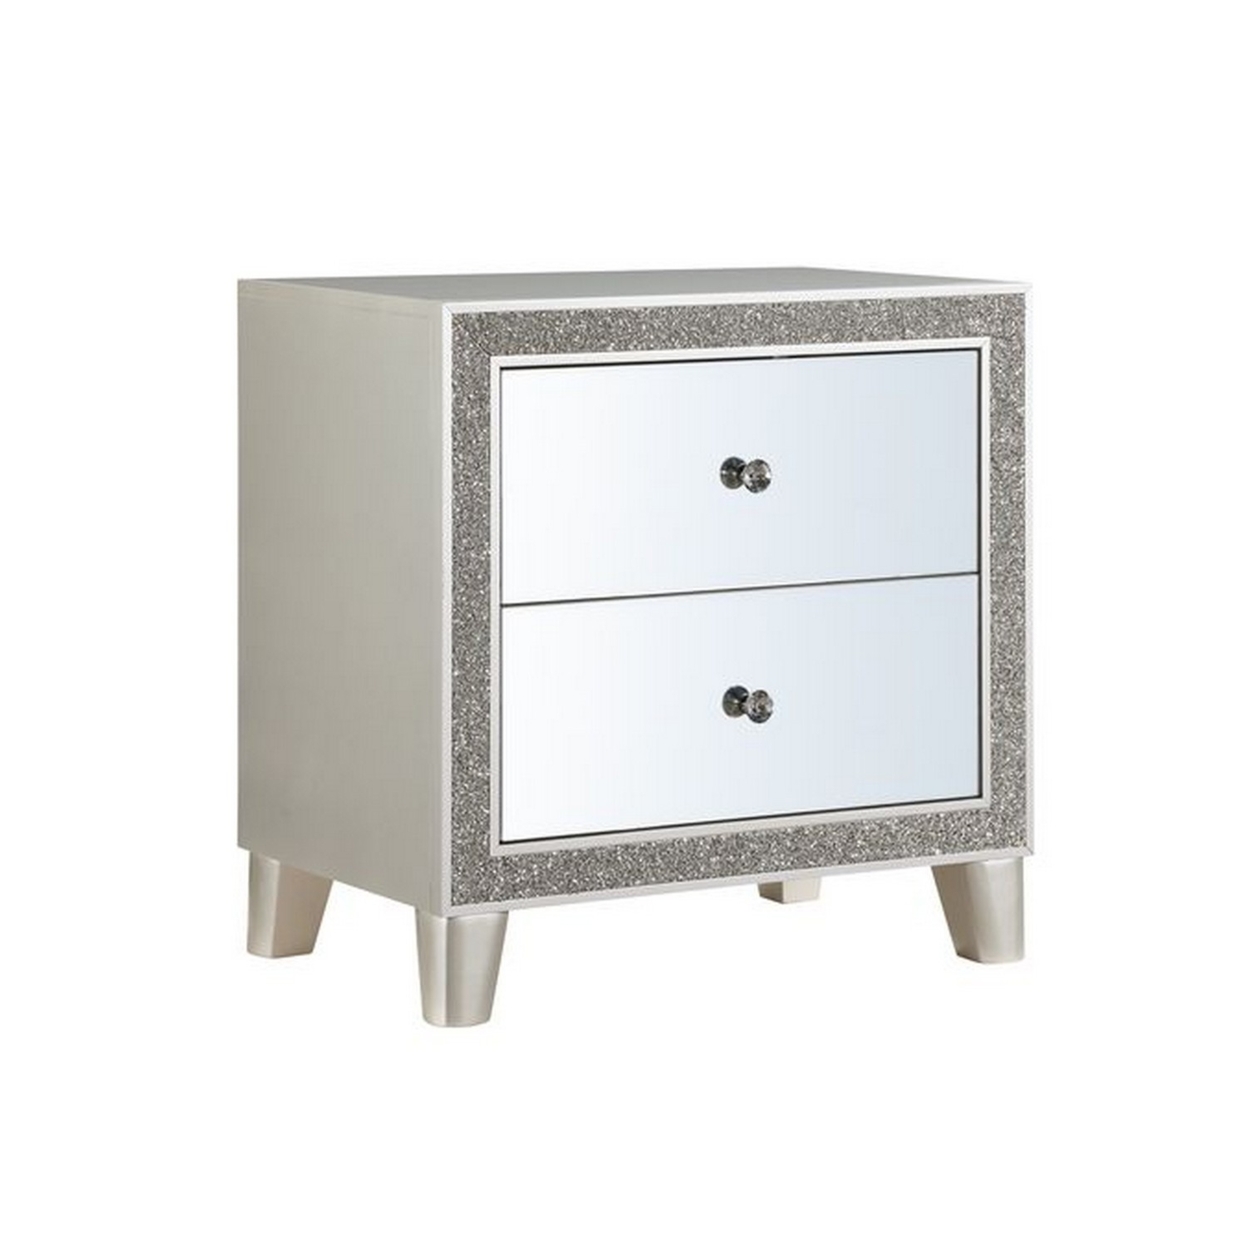 Nightstand With Mirrored Front 2 Drawers, Champagne Silver- Saltoro Sherpi